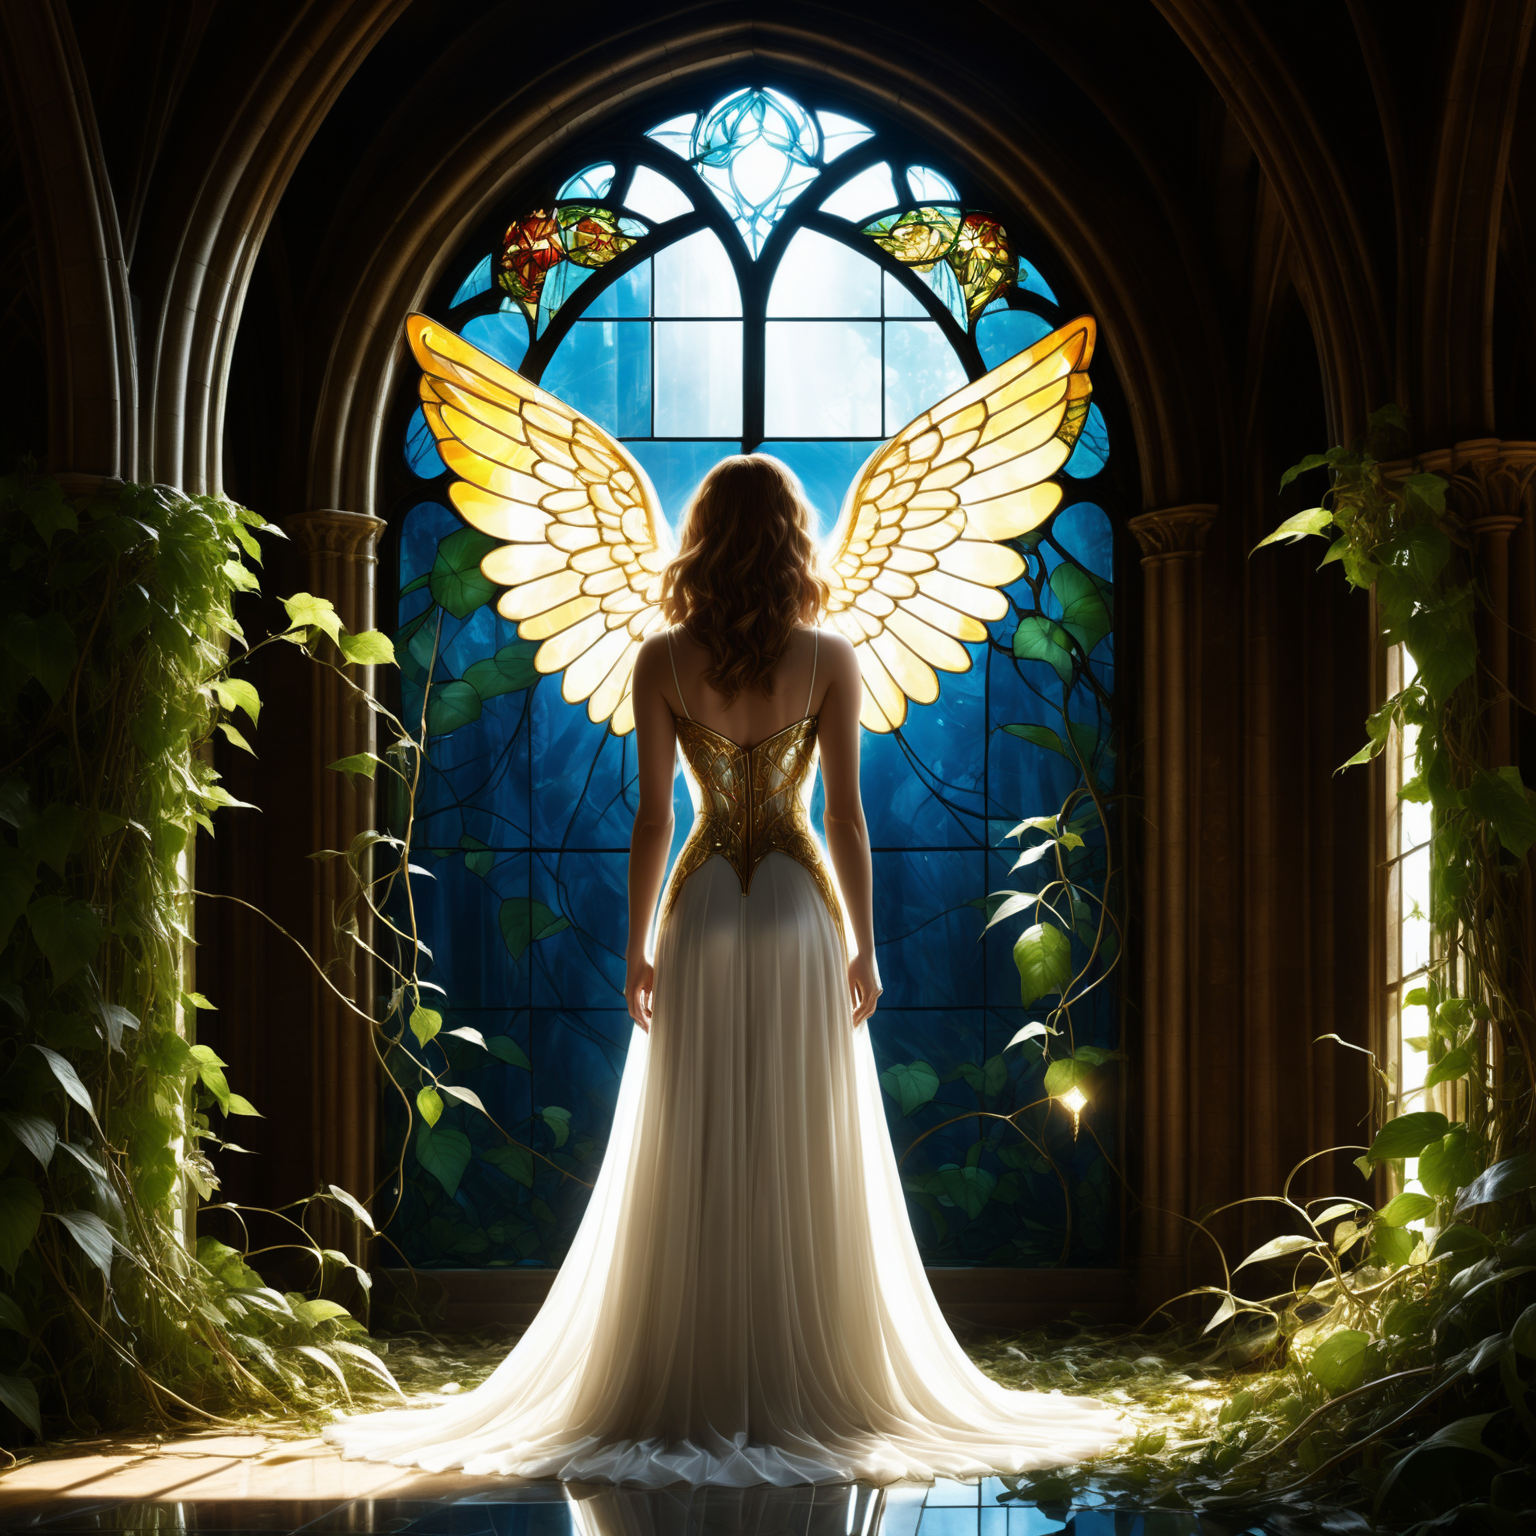 5. A living stained glass angel comes to life, spreading its prismatic wings in an abandoned cathedral overgrown with vine...